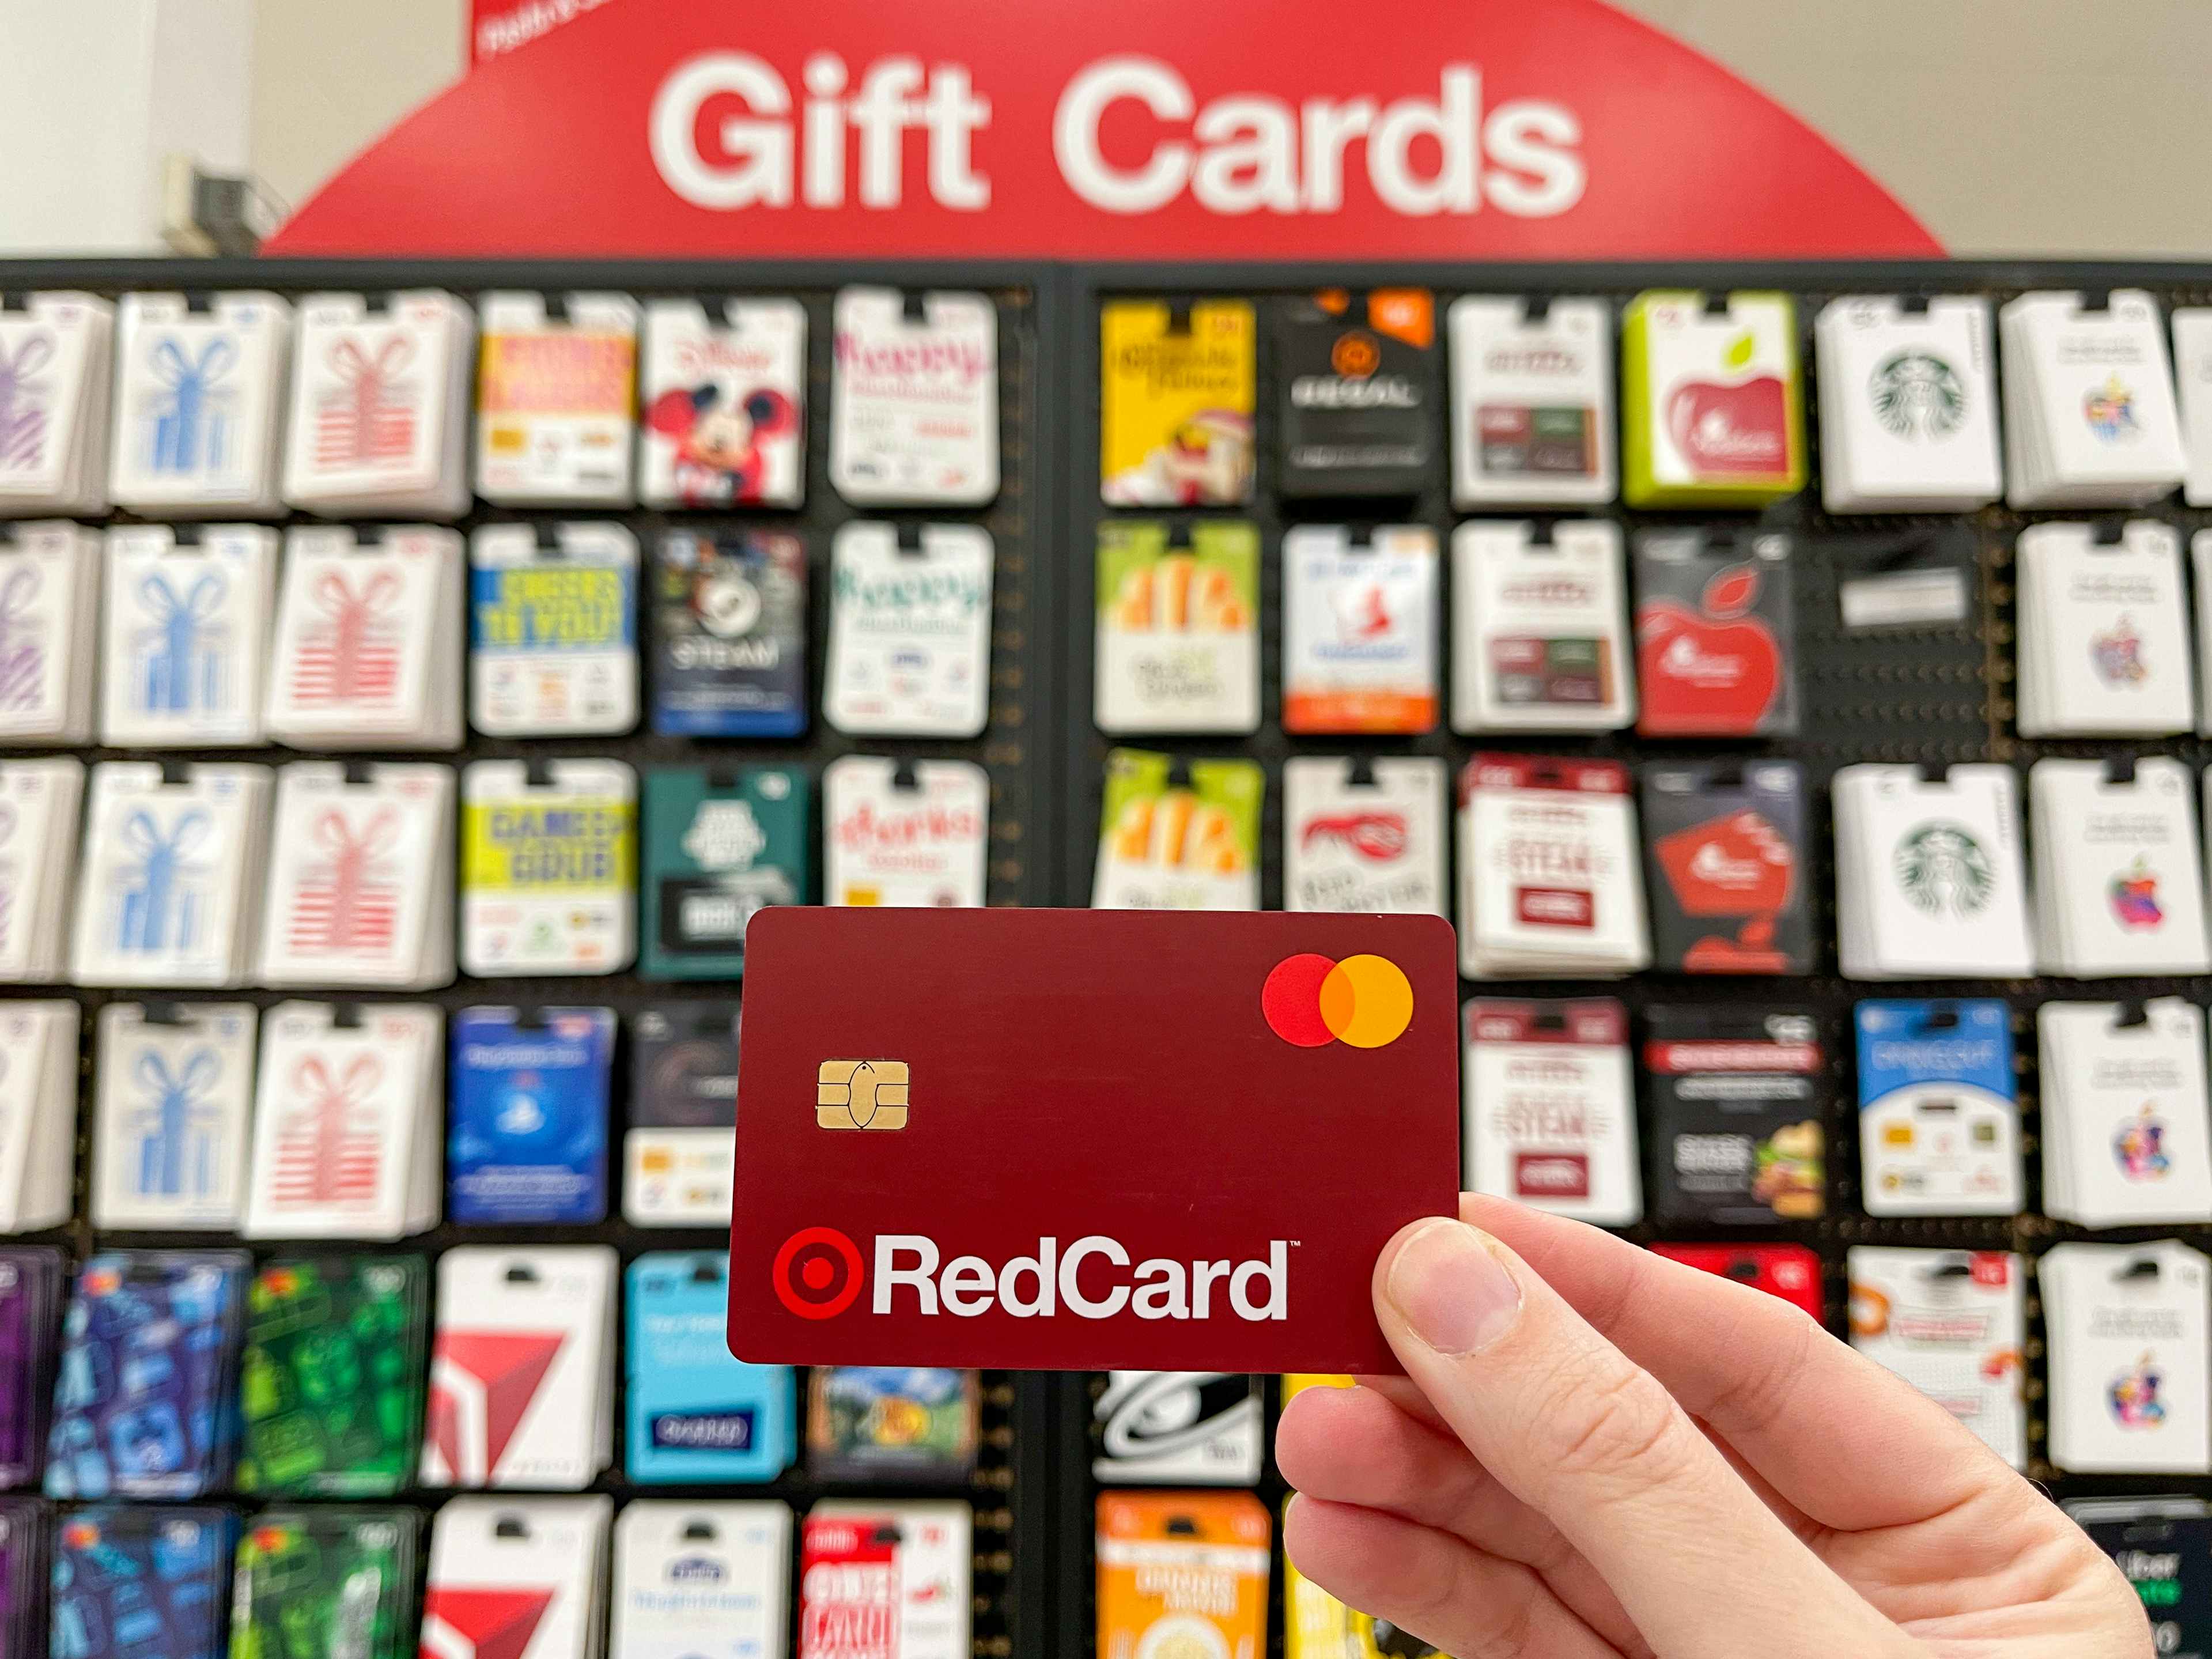 19 Best Places to Buy Discounted Gift Cards (Up to 90% Off) - MoneyPantry